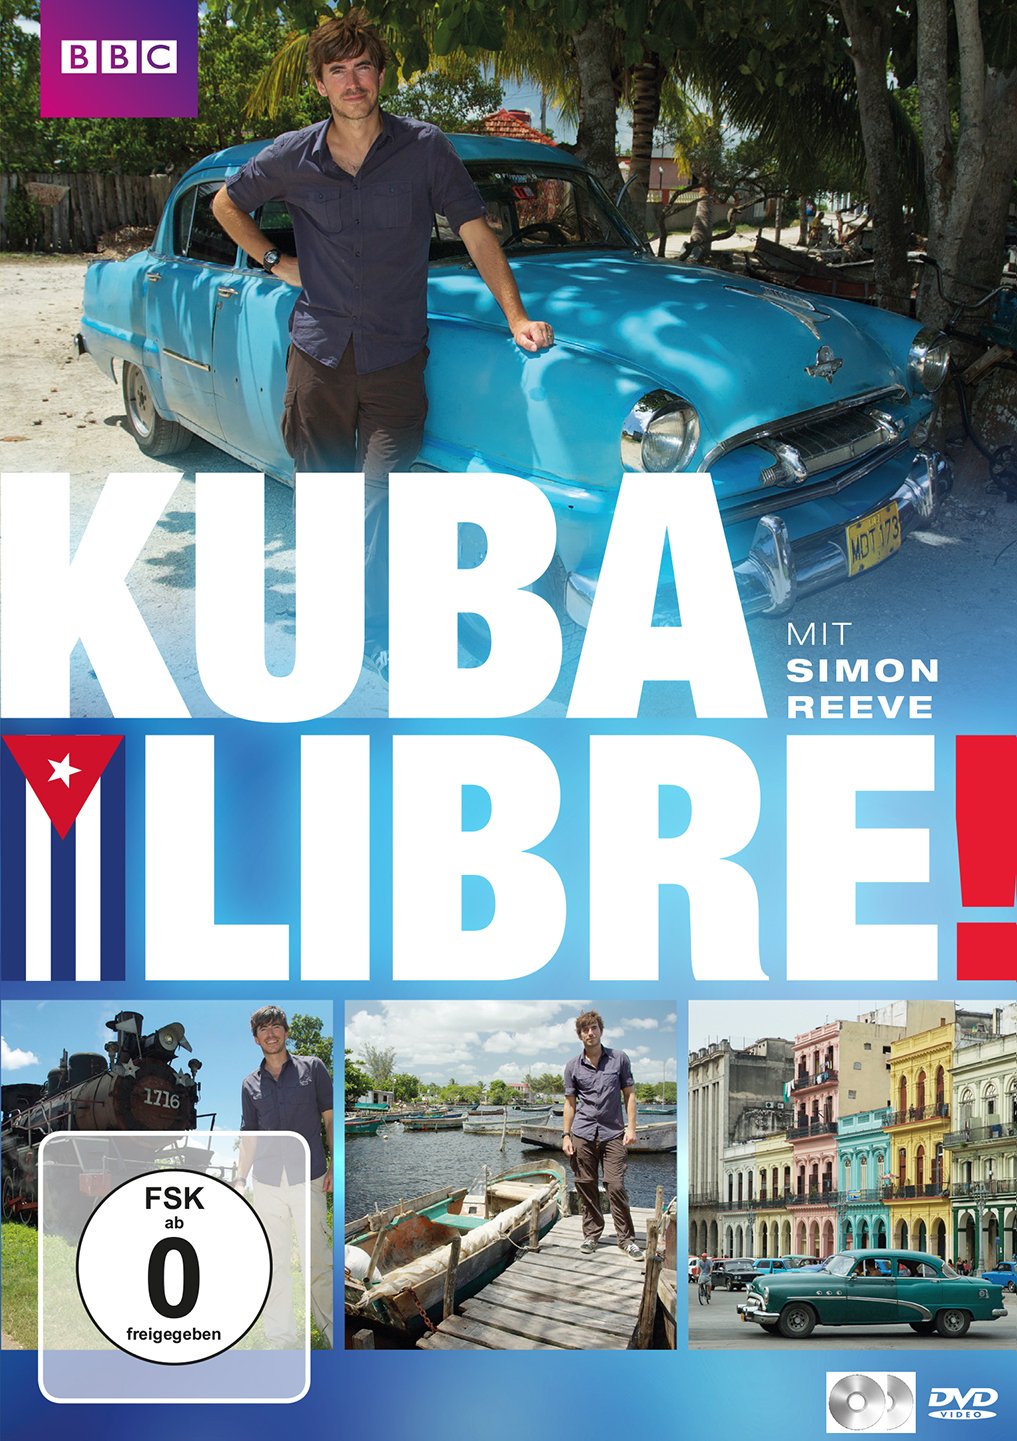 Simon Reeve on Twitter: "Get a bit of Kuba Libre! the german dvd of my  Cuban travels has just been released... https://t.co/P35gMLL4K4… "